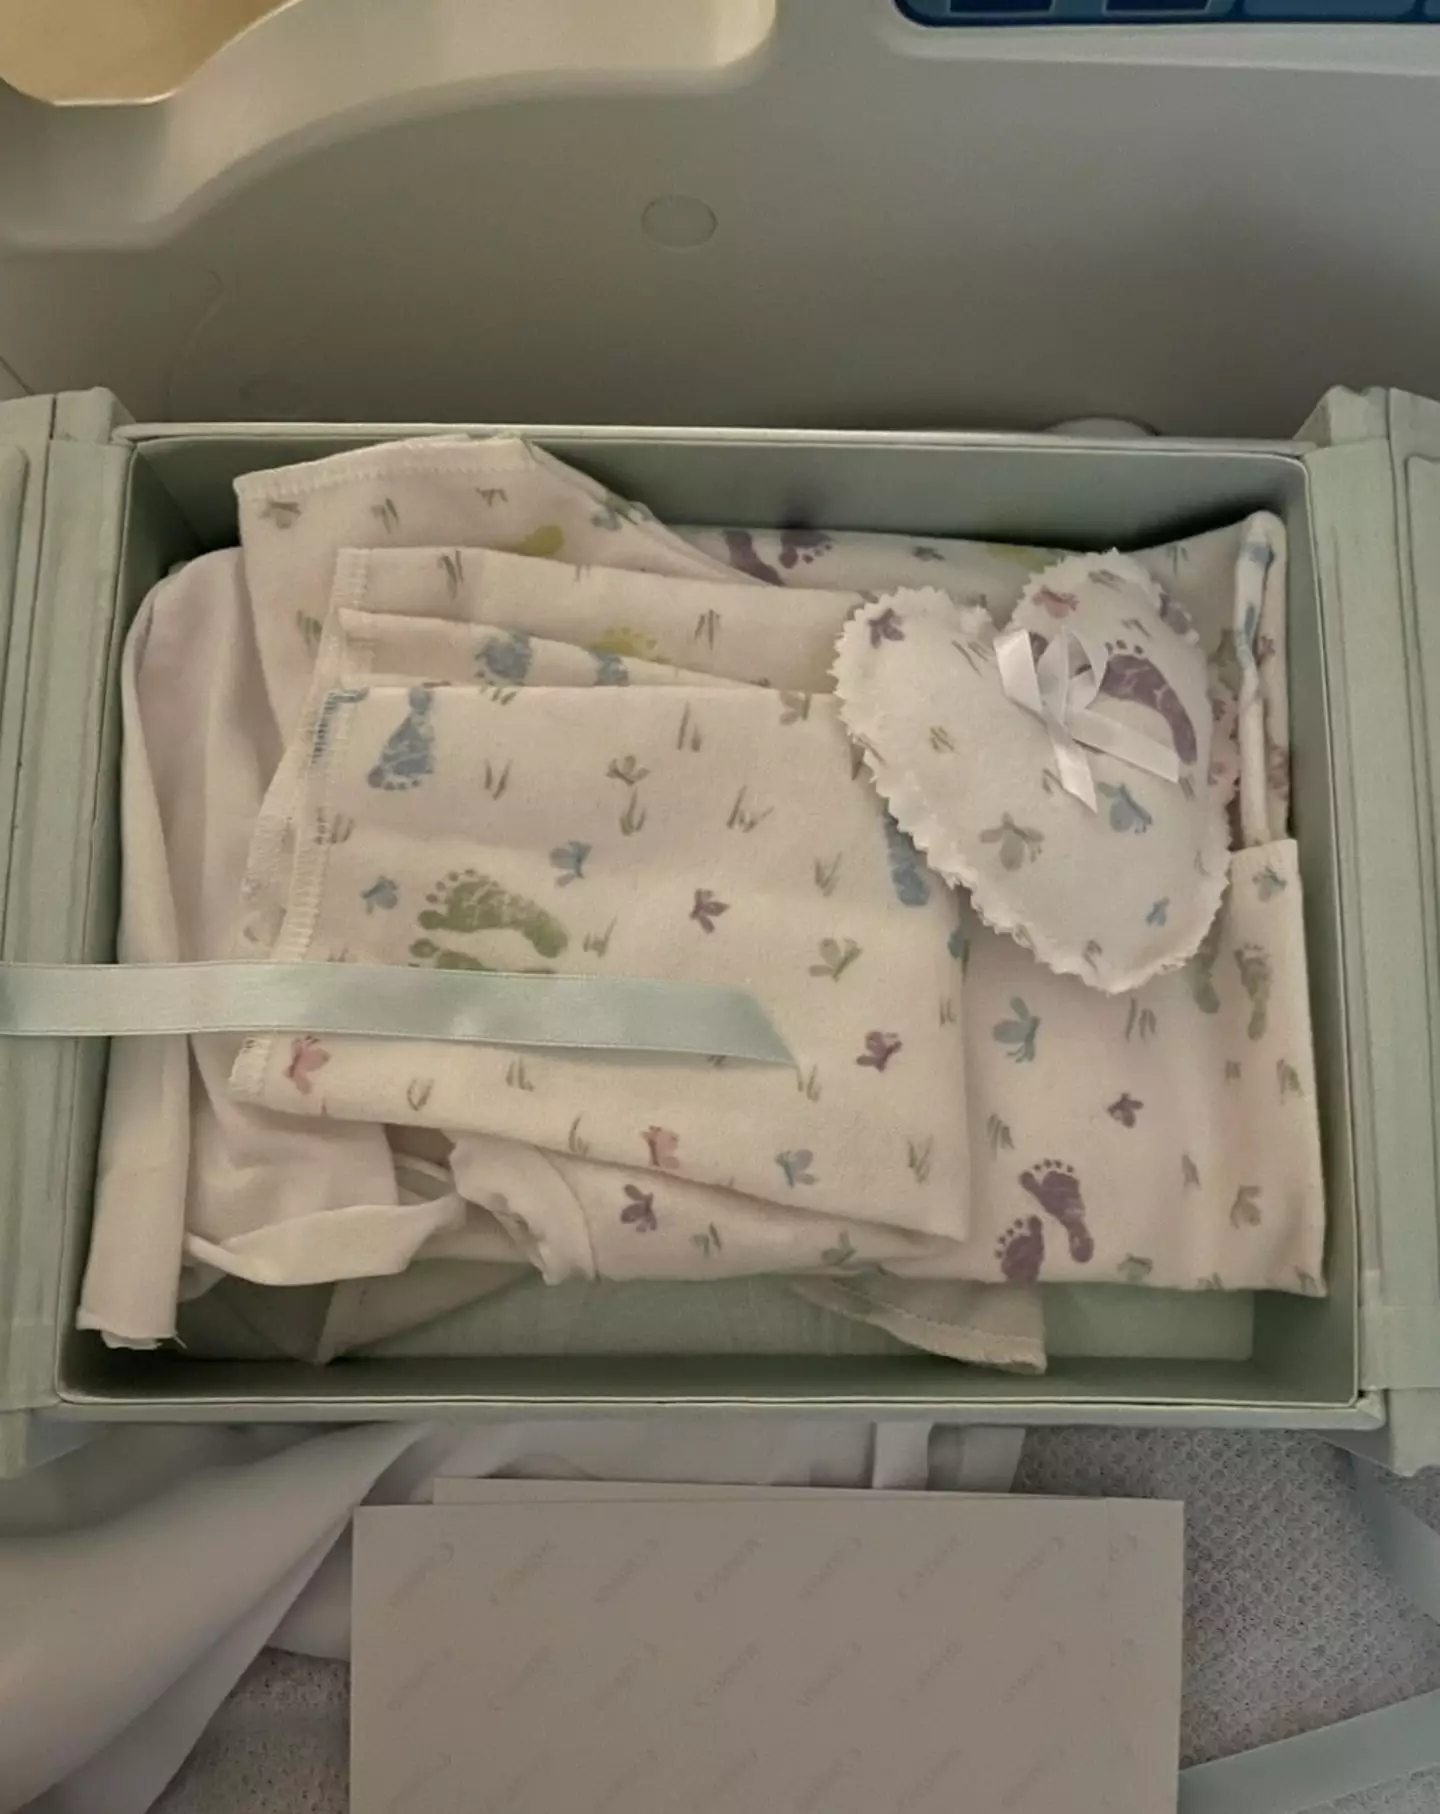 Maya shared an image of the memory box she received after giving birth to Mason. (